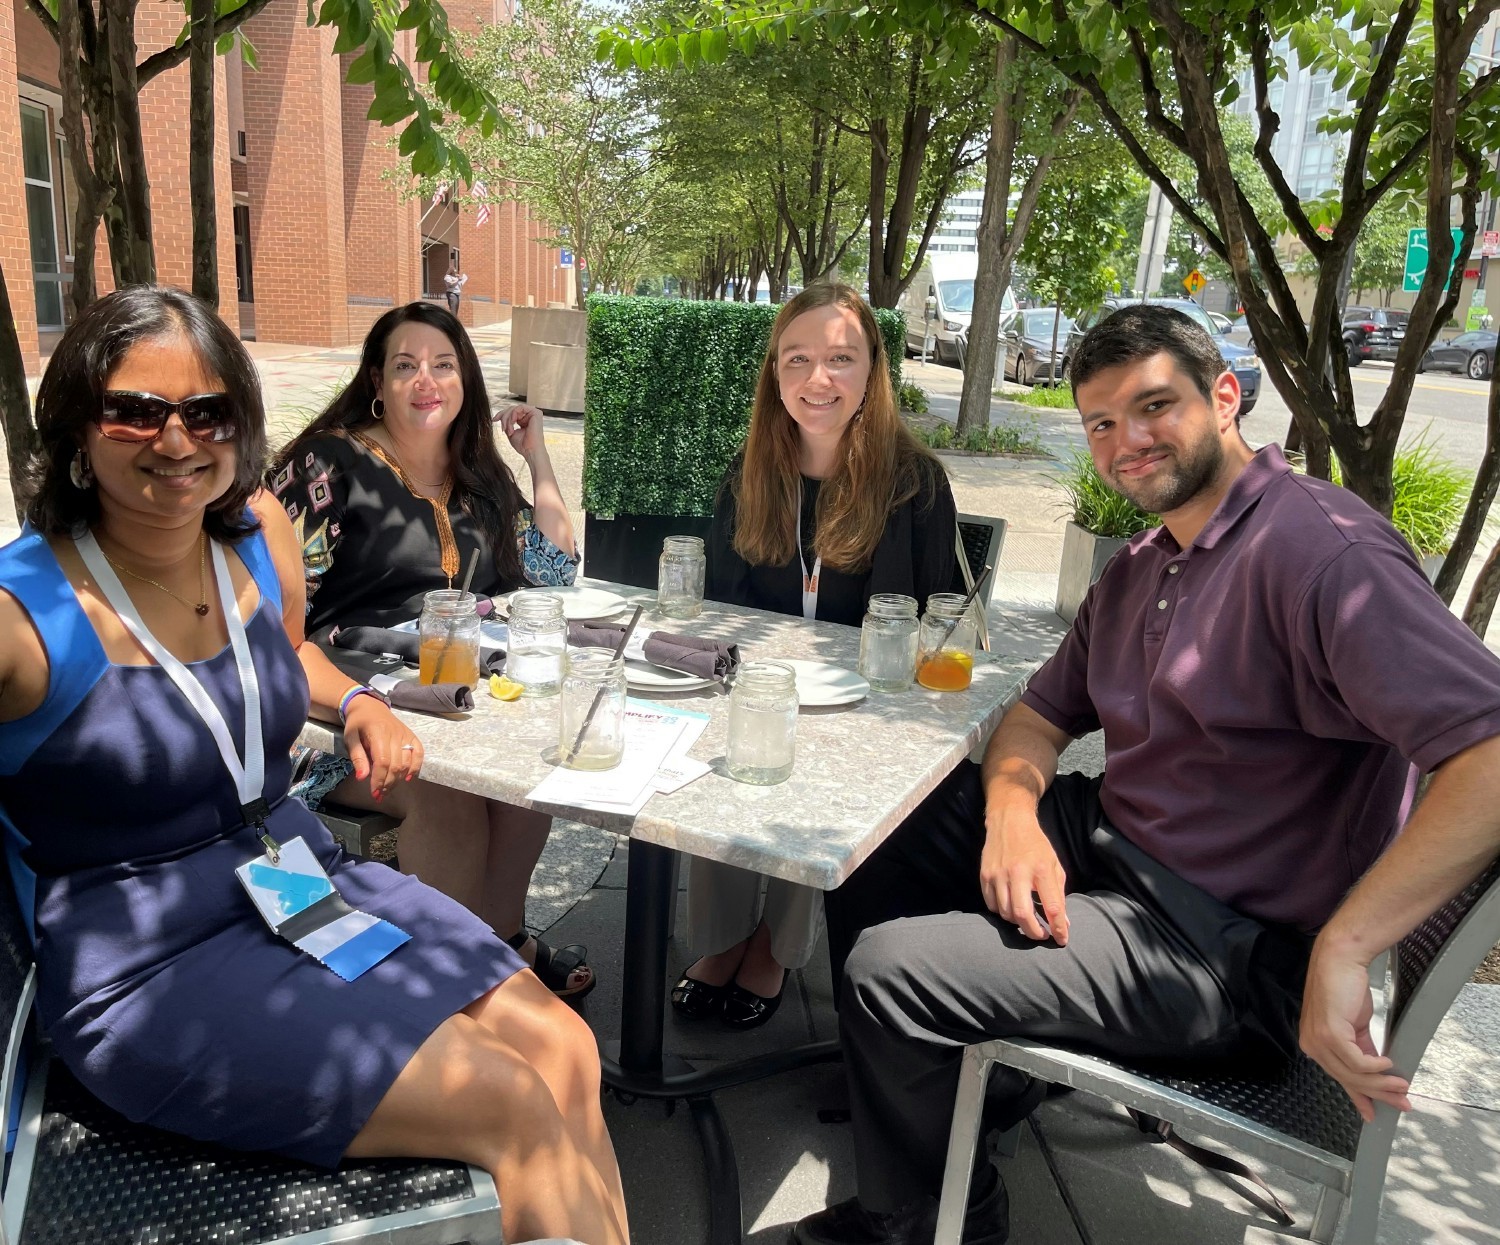 The Publications team enjoying lunch al fresco while attending the AMPLIFY - Content & Marketing Summit. (June 2022)